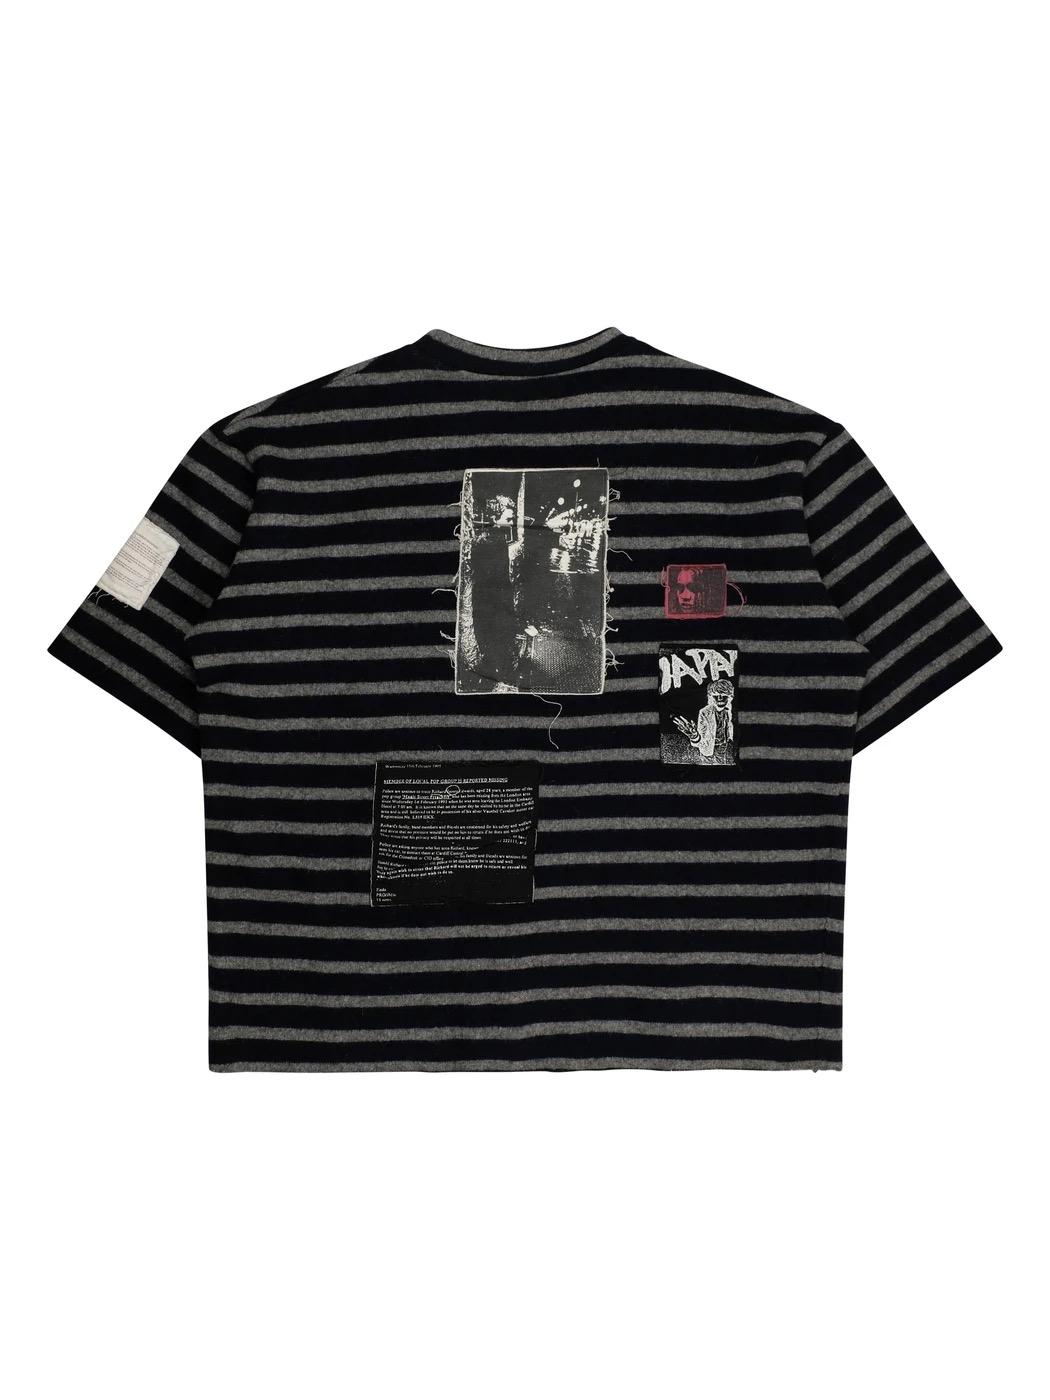 An extremely rare short sleeve sweater from Raf Simon's AW01 collection. This piece of striped knitwear features patches throughout with different pieces of artwork and script.

Size 50

